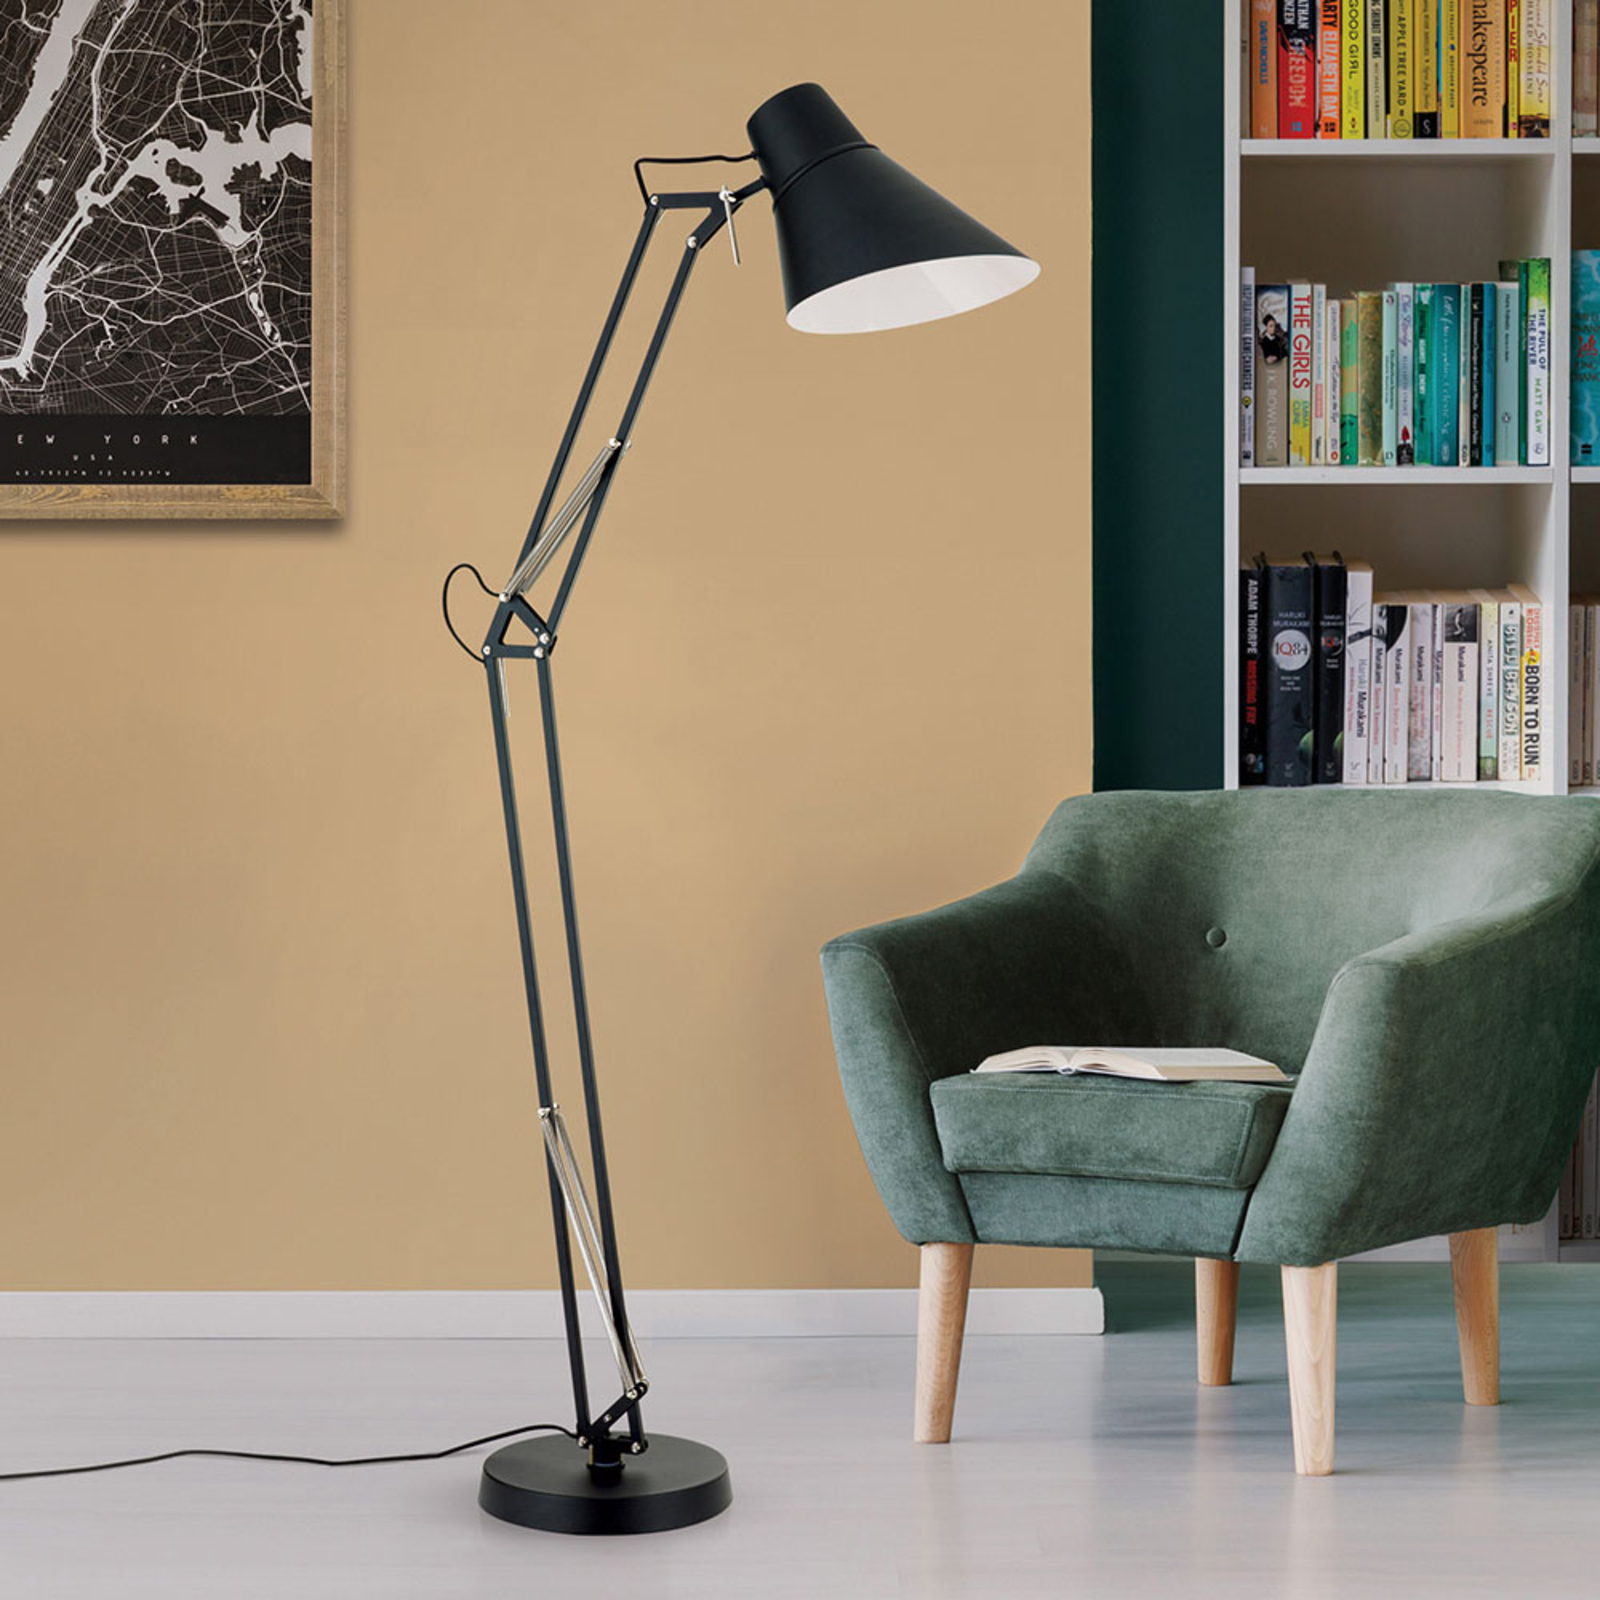 Bachelor floor lamp with adjustable joints